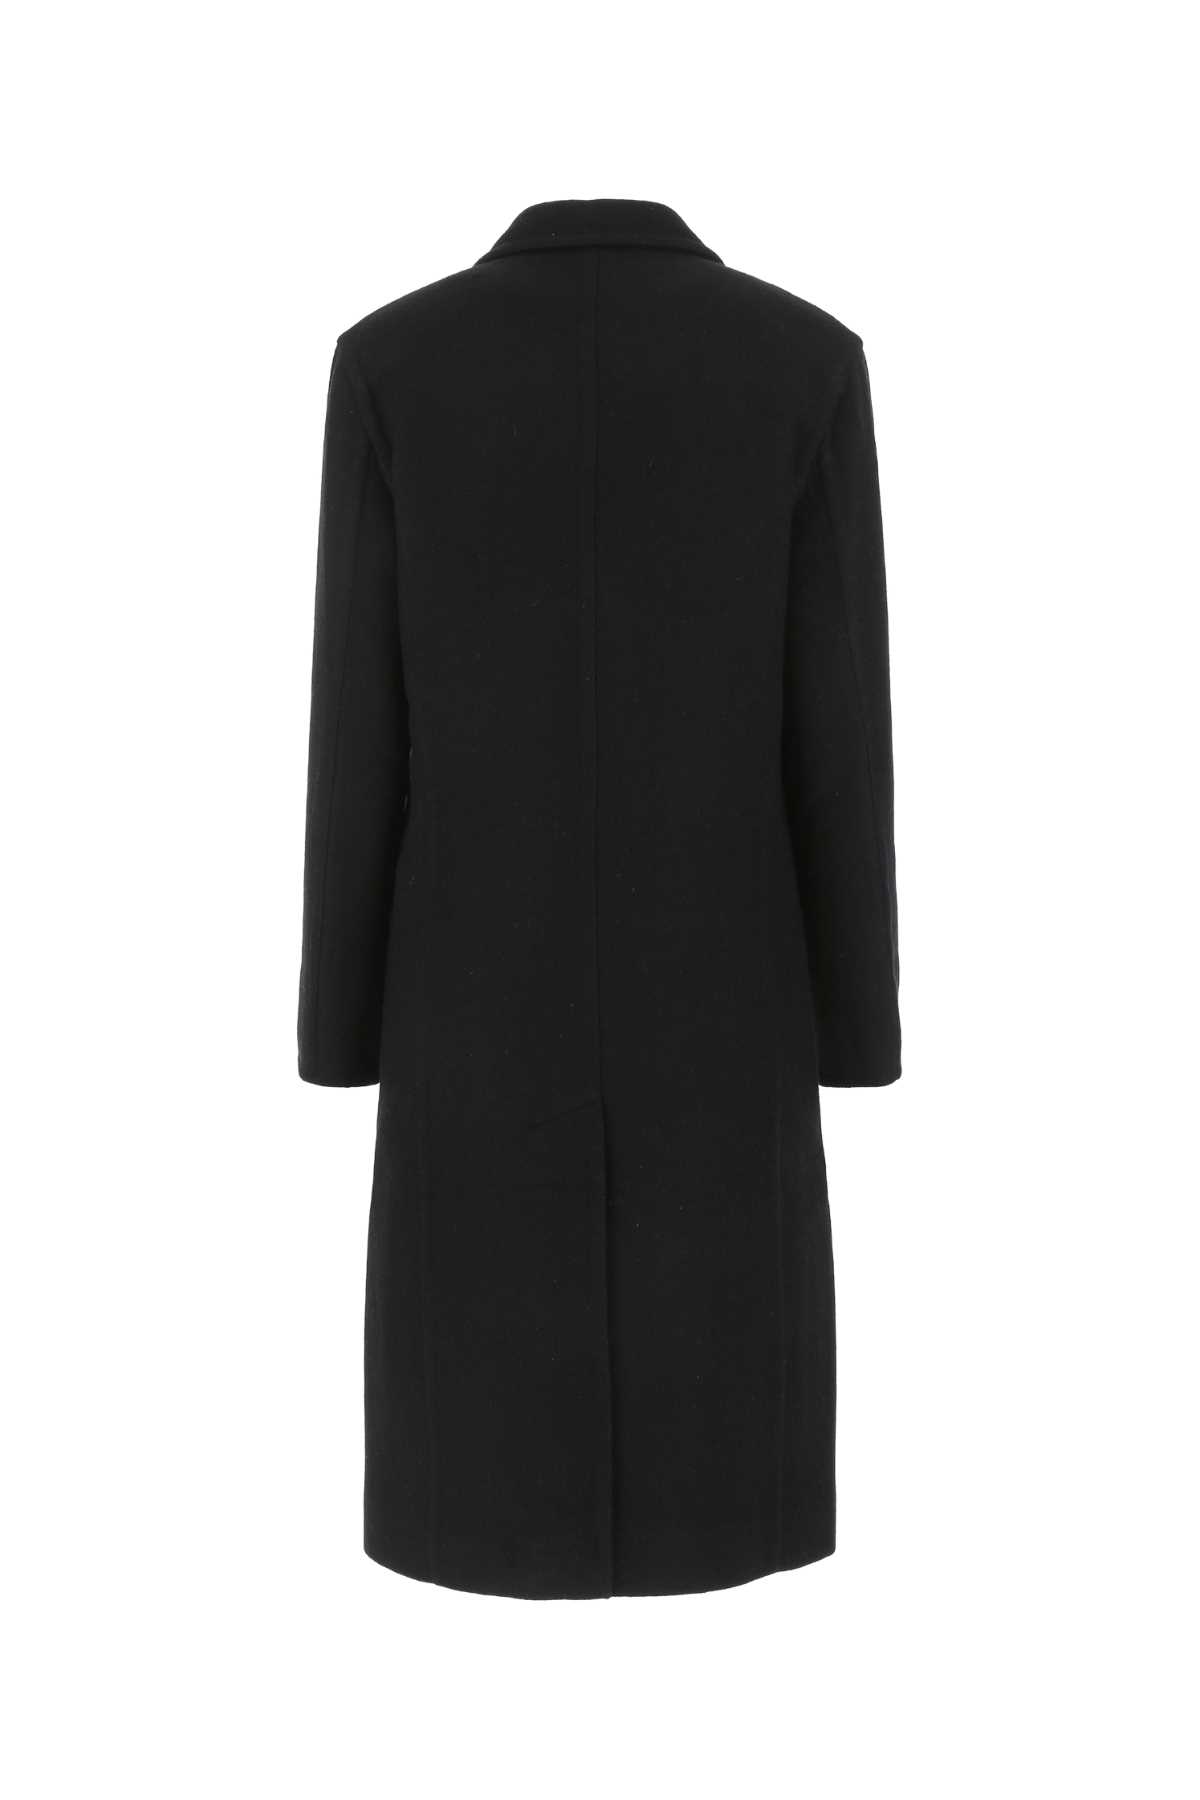 Givenchy Black Wool Blend Coat In 002